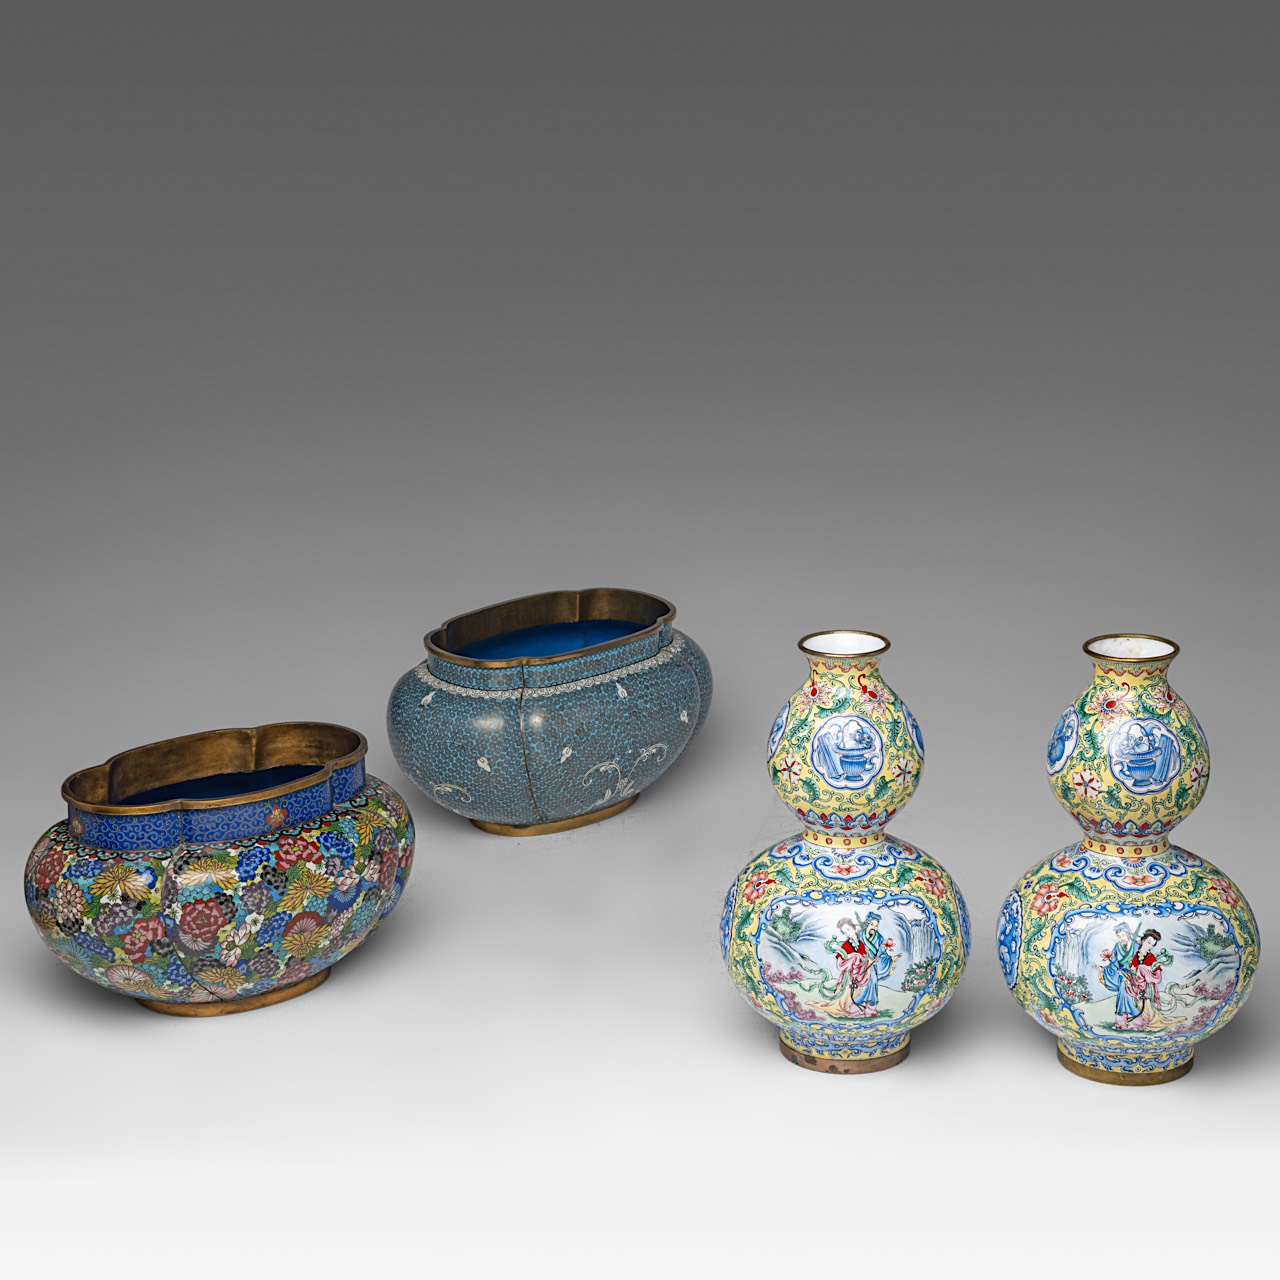 A small collection of two Chinese cloisonne narcissus planters and a pair of Canton enamelled double